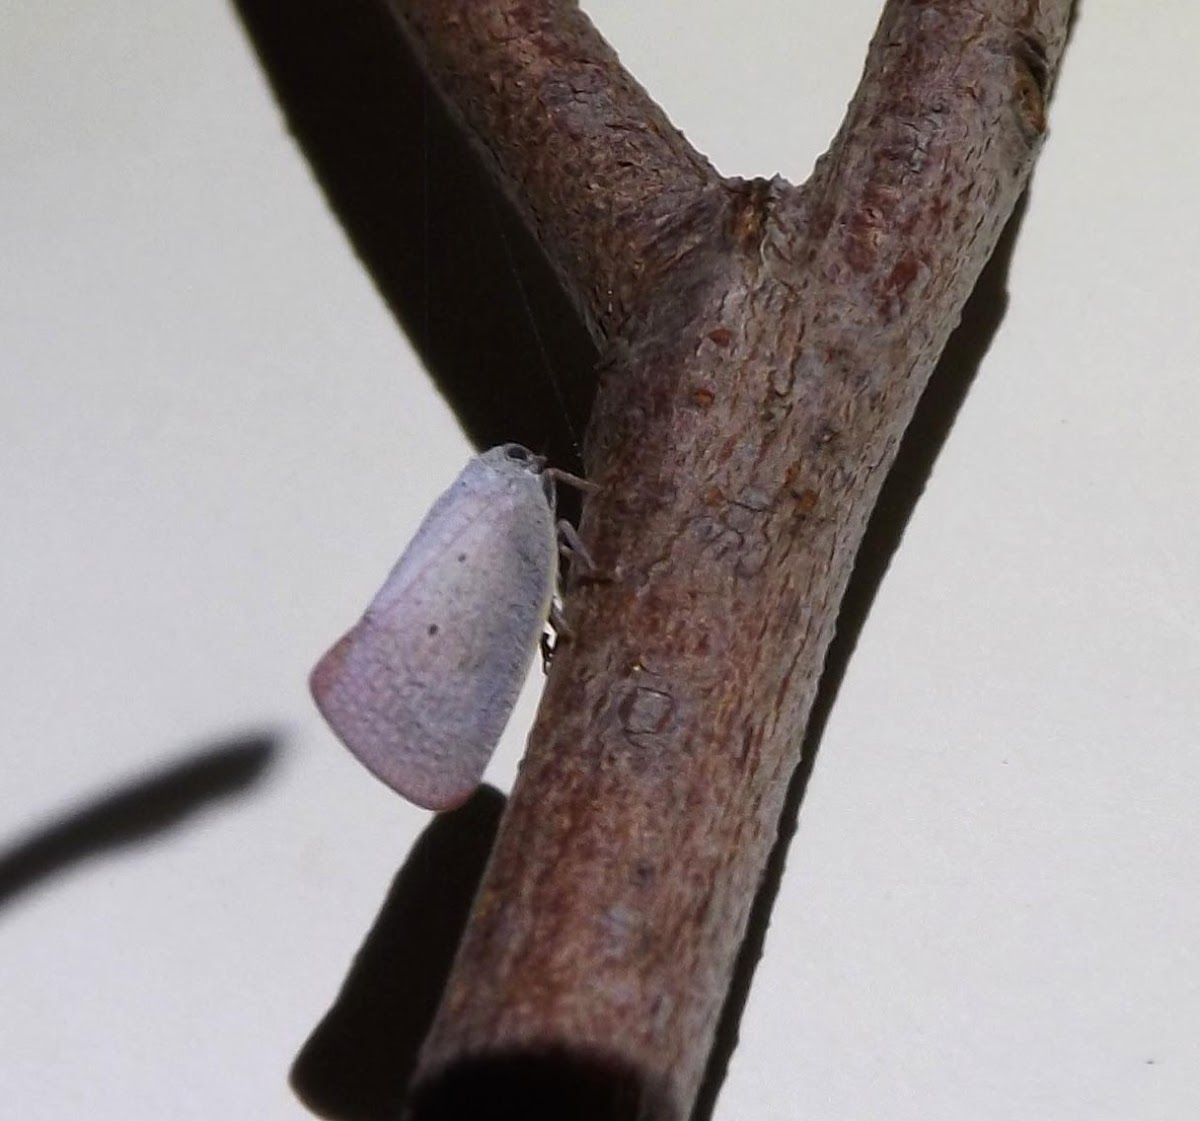 Two-spotted Flatid Planthopper